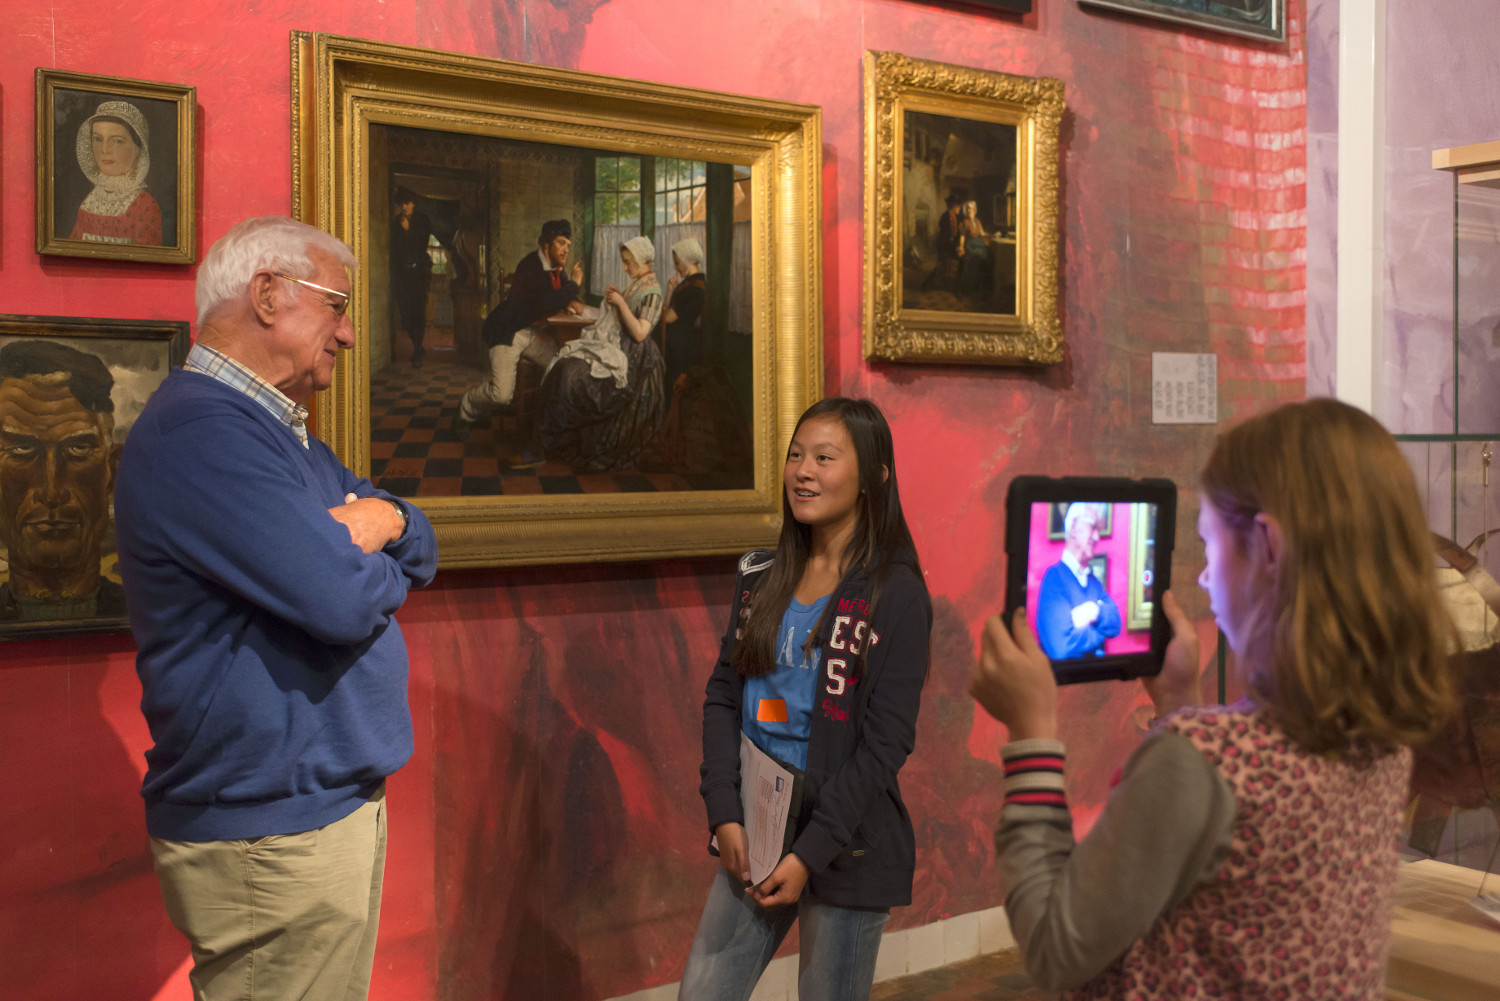 © Zeeuws Museum, Image: Anda van Riet One girl is using a tablet to film another girl who is talking with an older man, presumably about the painting behind them.